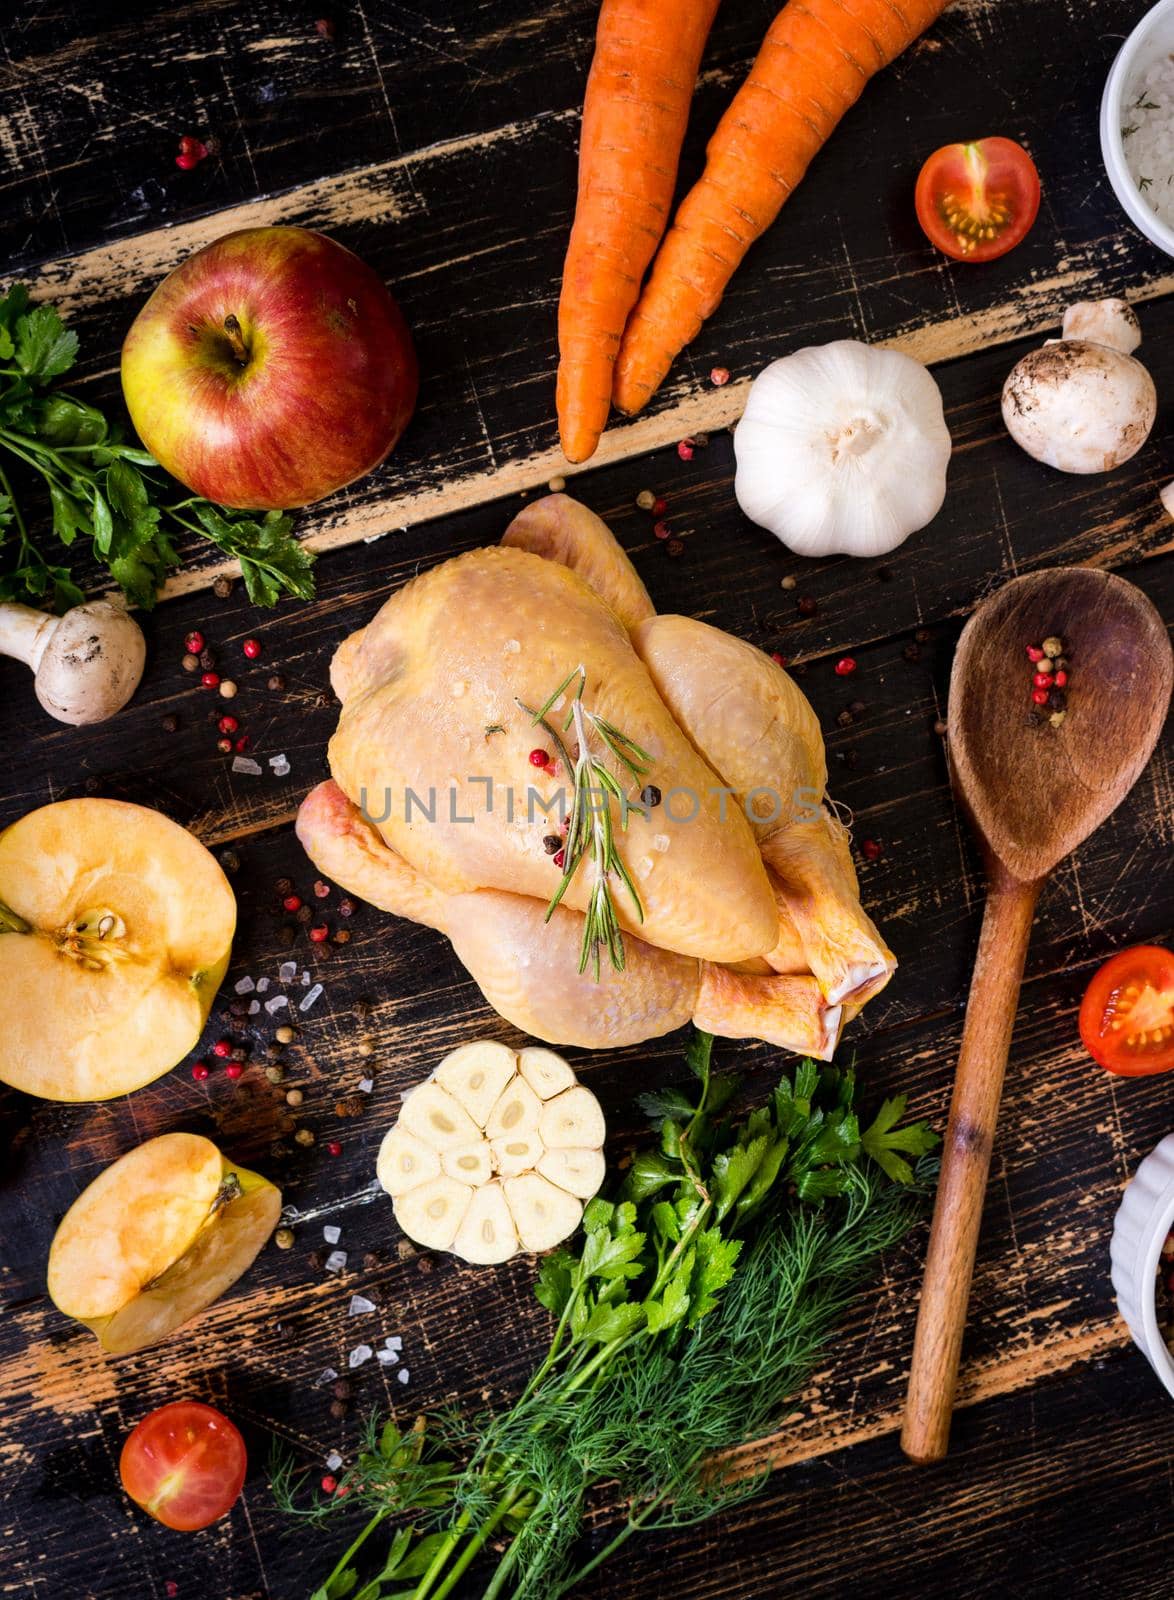 Raw whole chicken ready for cooking. Chicken with vegetables, herbs and spices on a black rustic wooden background. Diet or clean healthy eating concept. Ingredientd for cooking